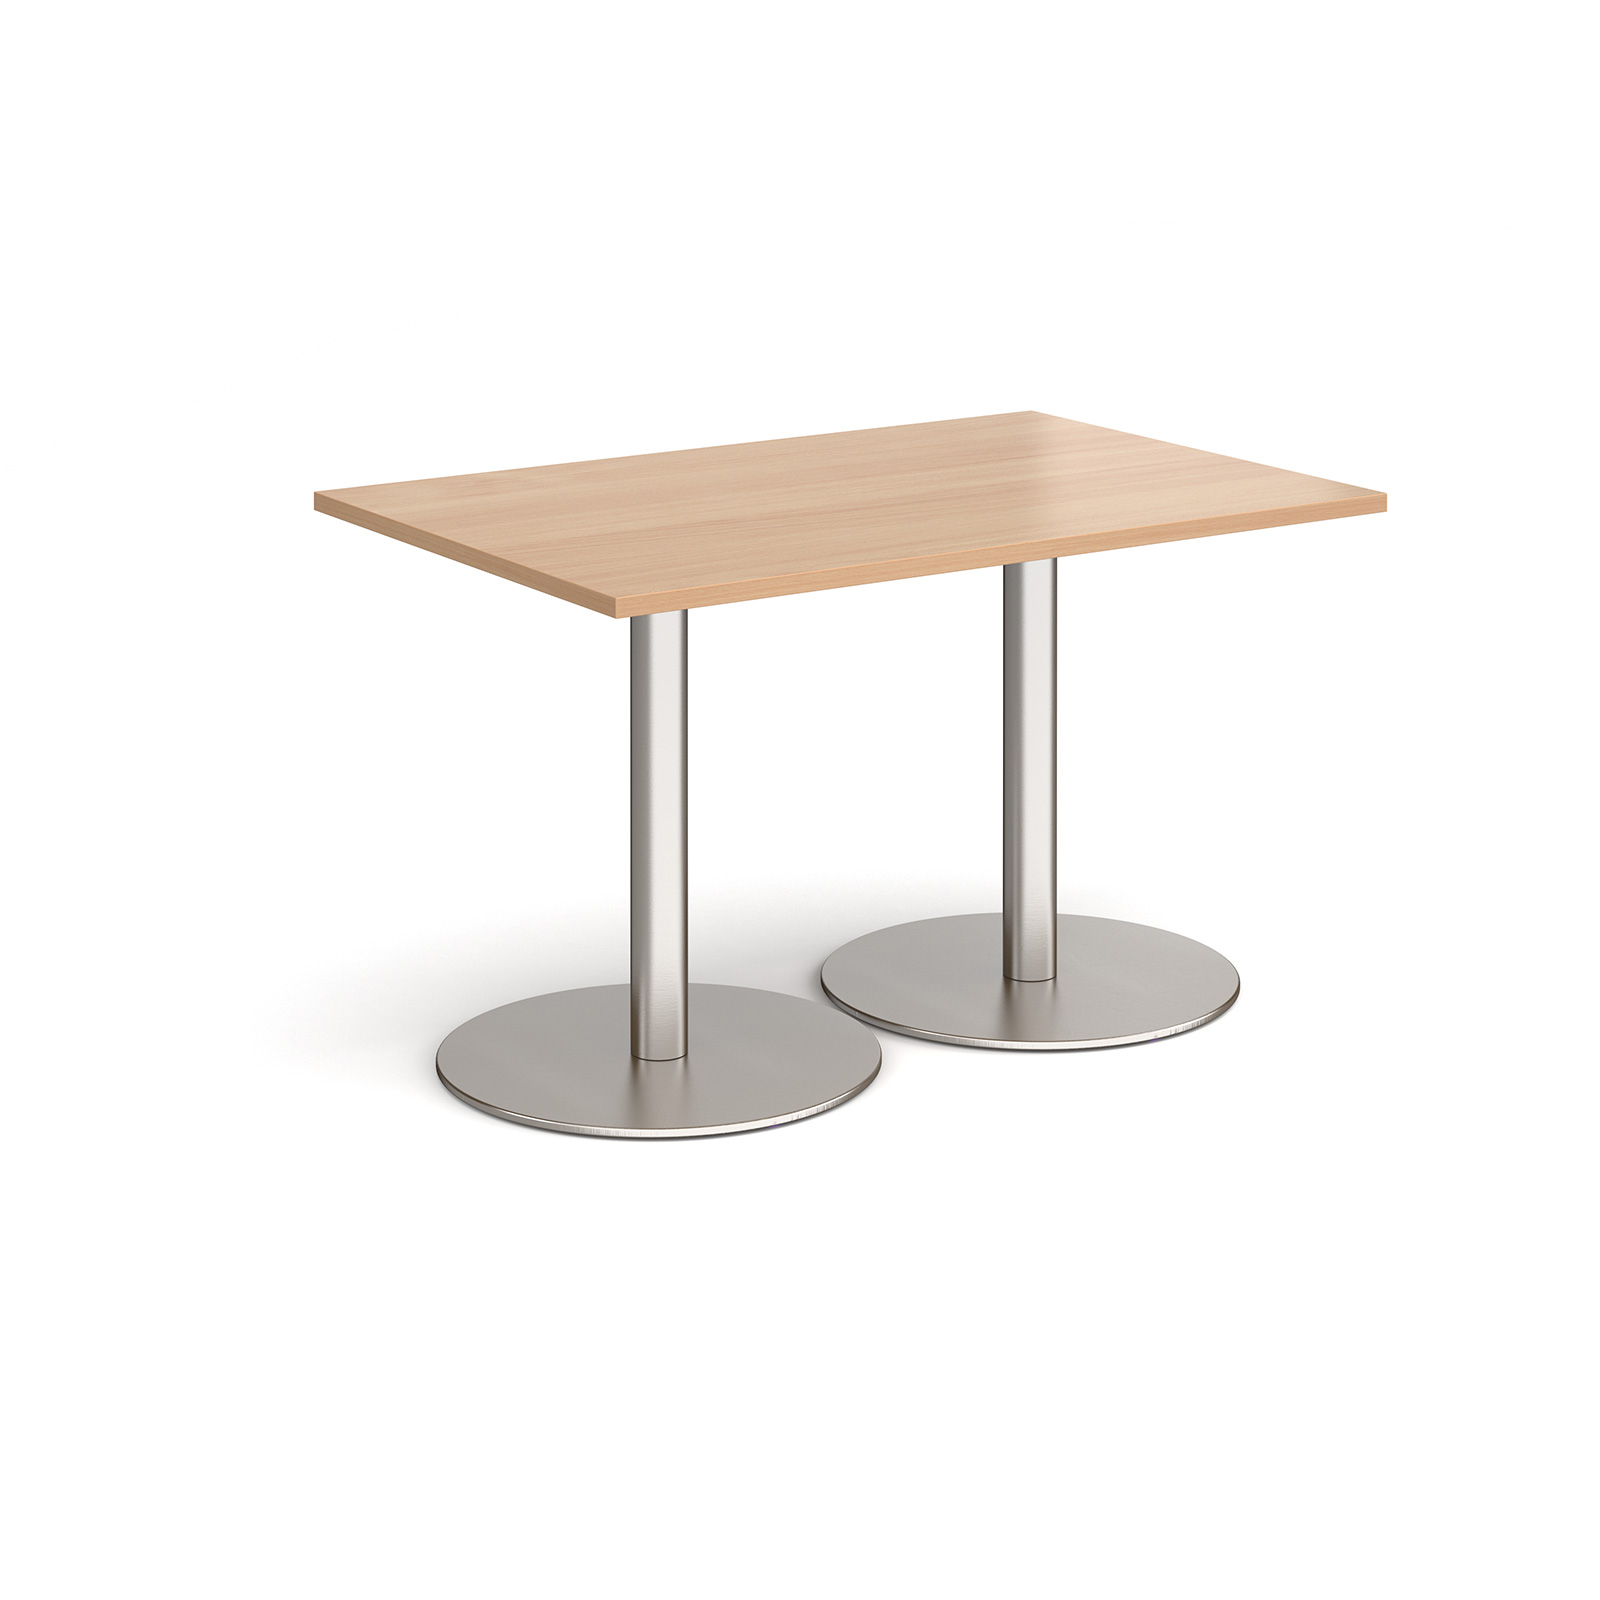 Monza rectangular dining table with flat round brushed steel bases 1200mm x 800mm - beech